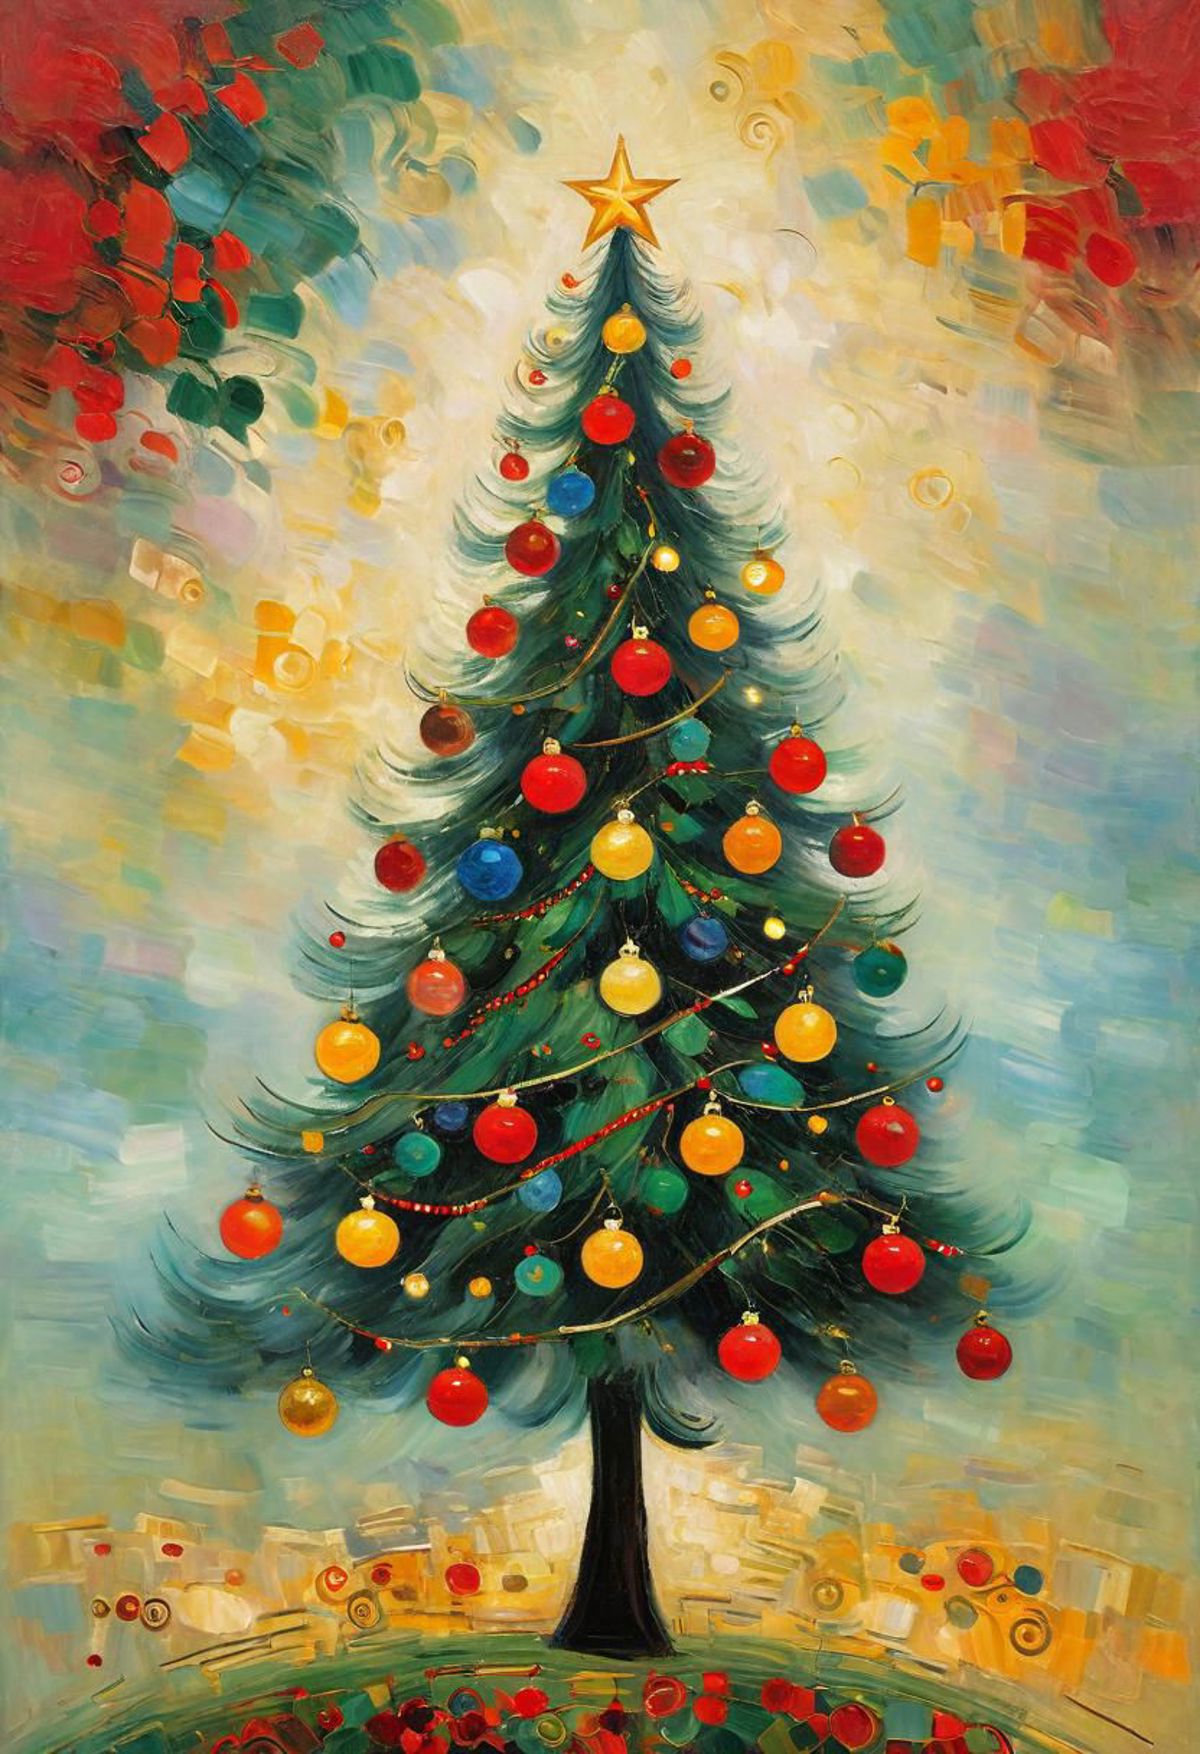 A Painted Christmas Tree with Ornaments and Lights